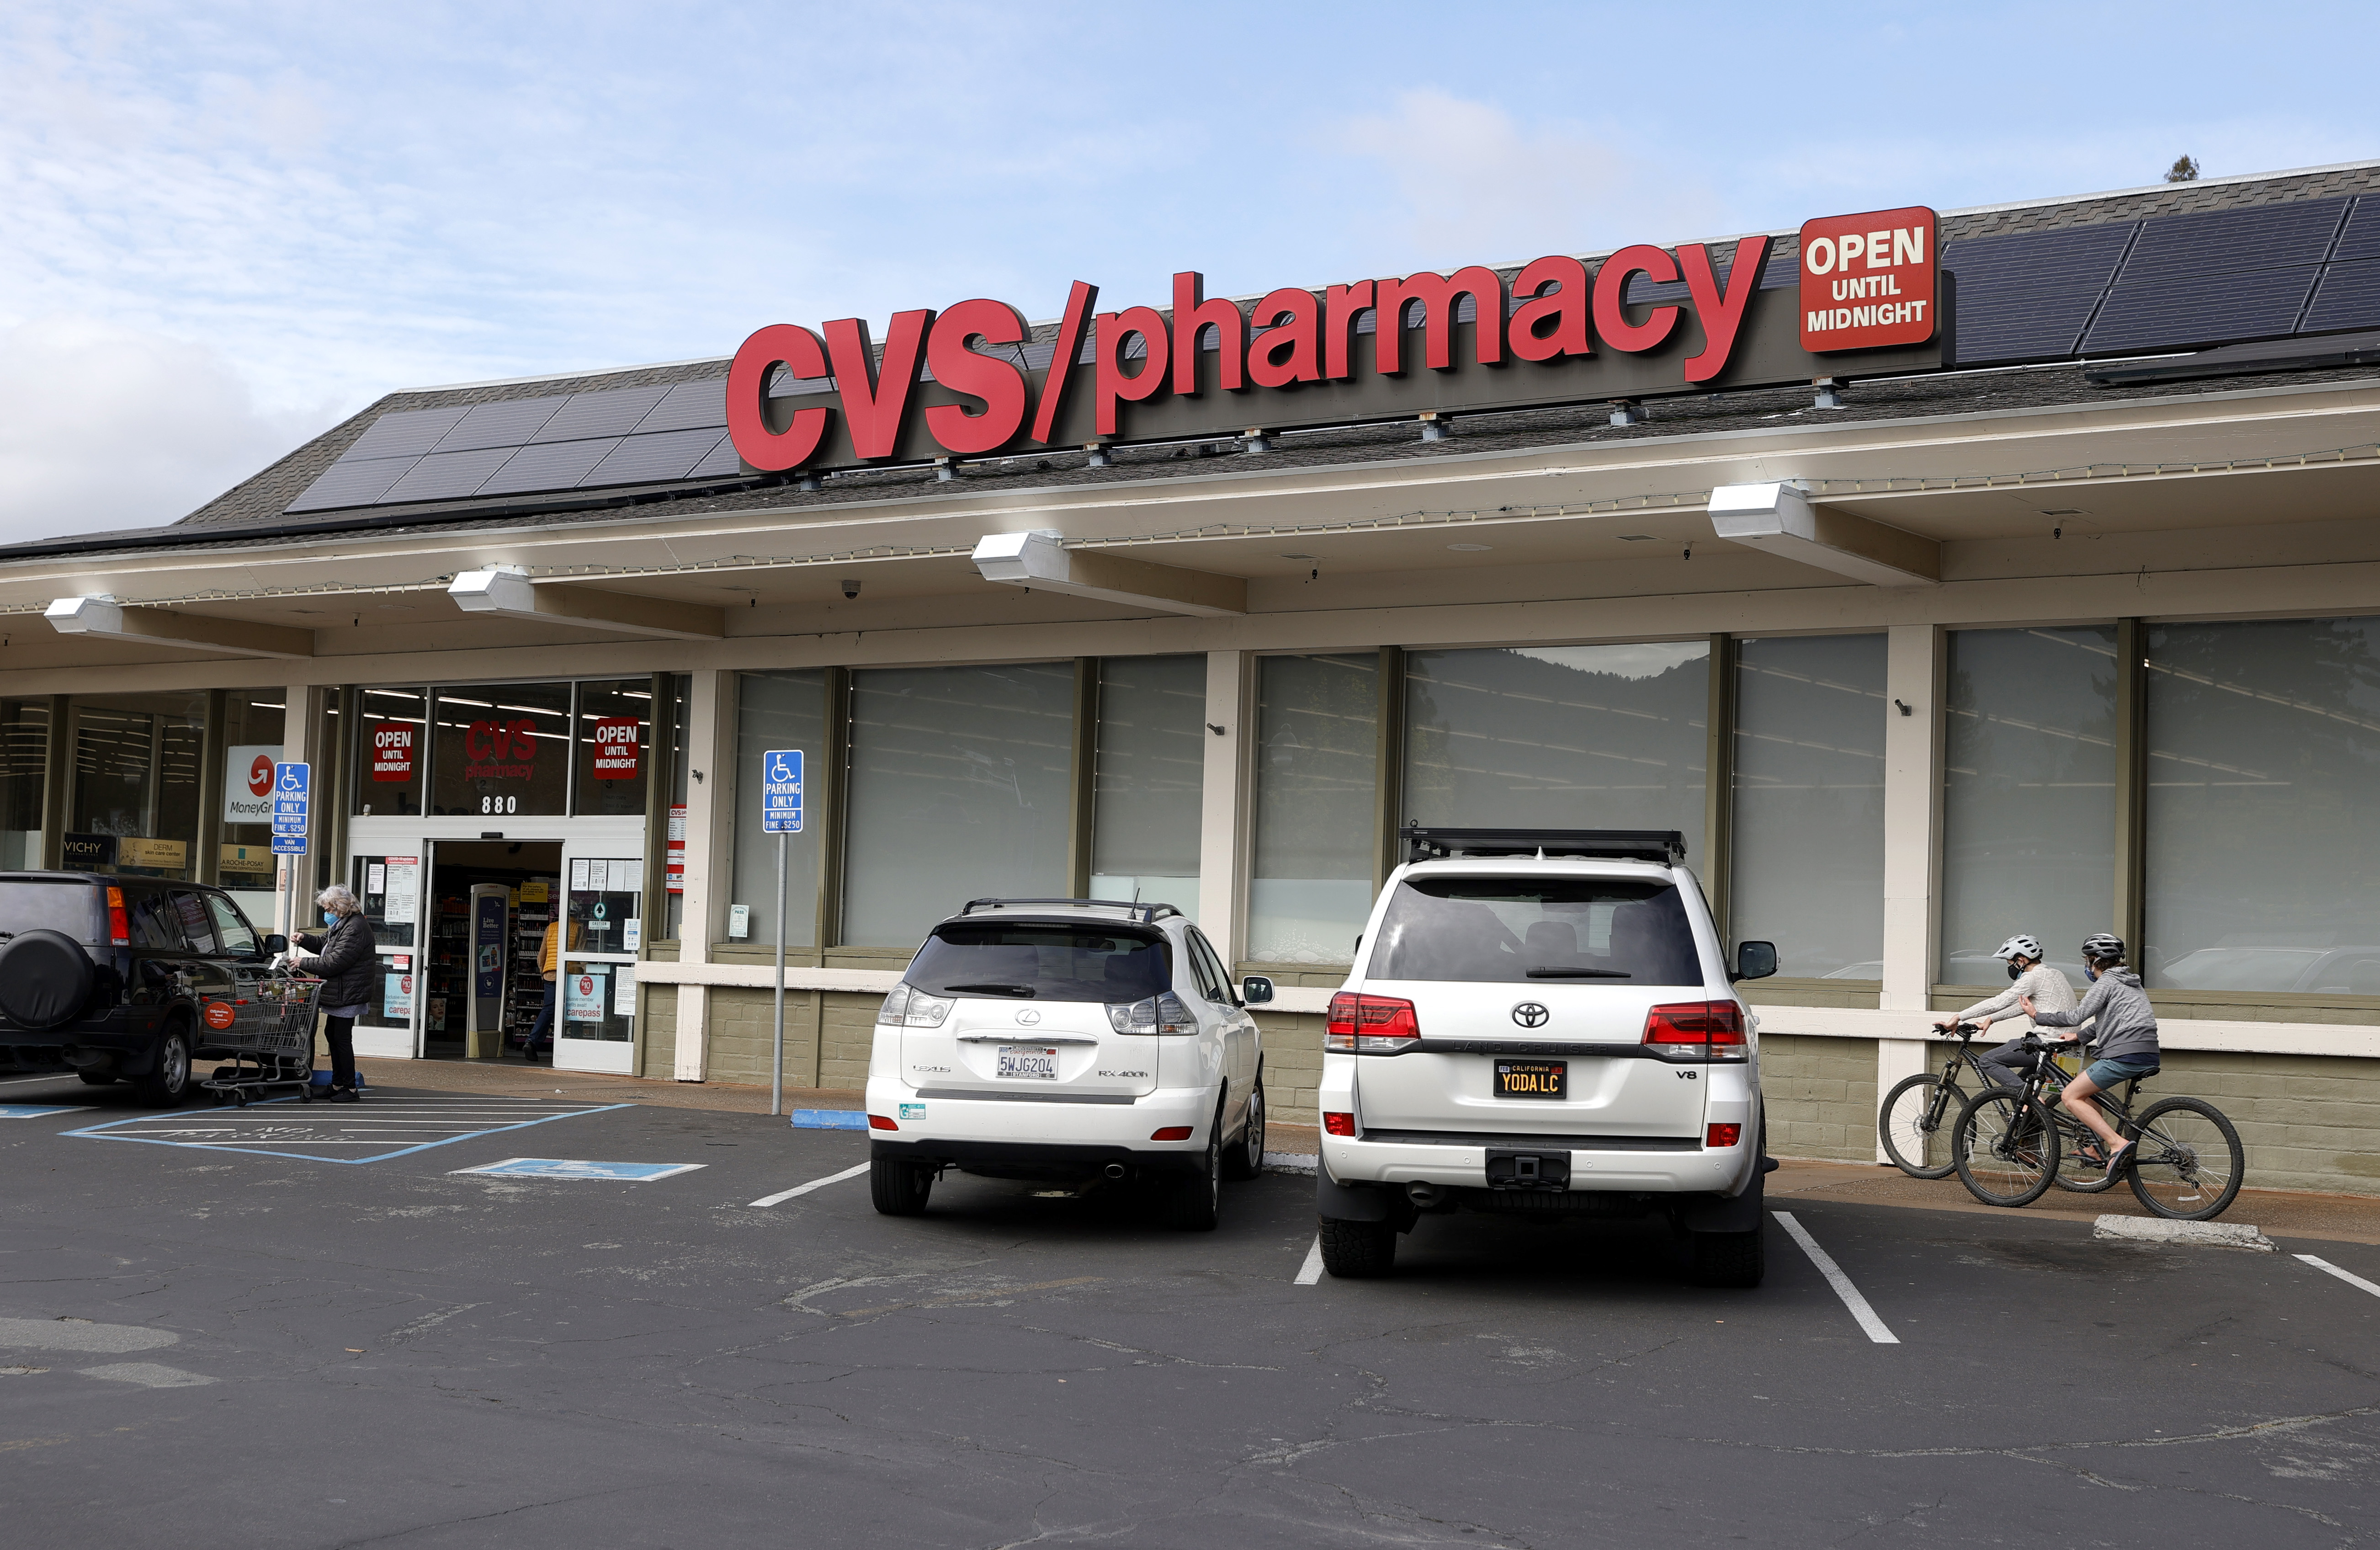 SAN ANSELMO, CALIFORNIA - FEBRUARY 16: Pedestrians walk by a CVS store on February 16, 2021 in San Anselmo, California. CVS reported better than expected fourth-quarter earnings as the retail pharmacy chain brought in new customers with COVID-19 testing and vaccines. The company's revenue was $69.55 billion compared to $66.89 billion one year ago. (Photo by Justin Sullivan/Getty Images)